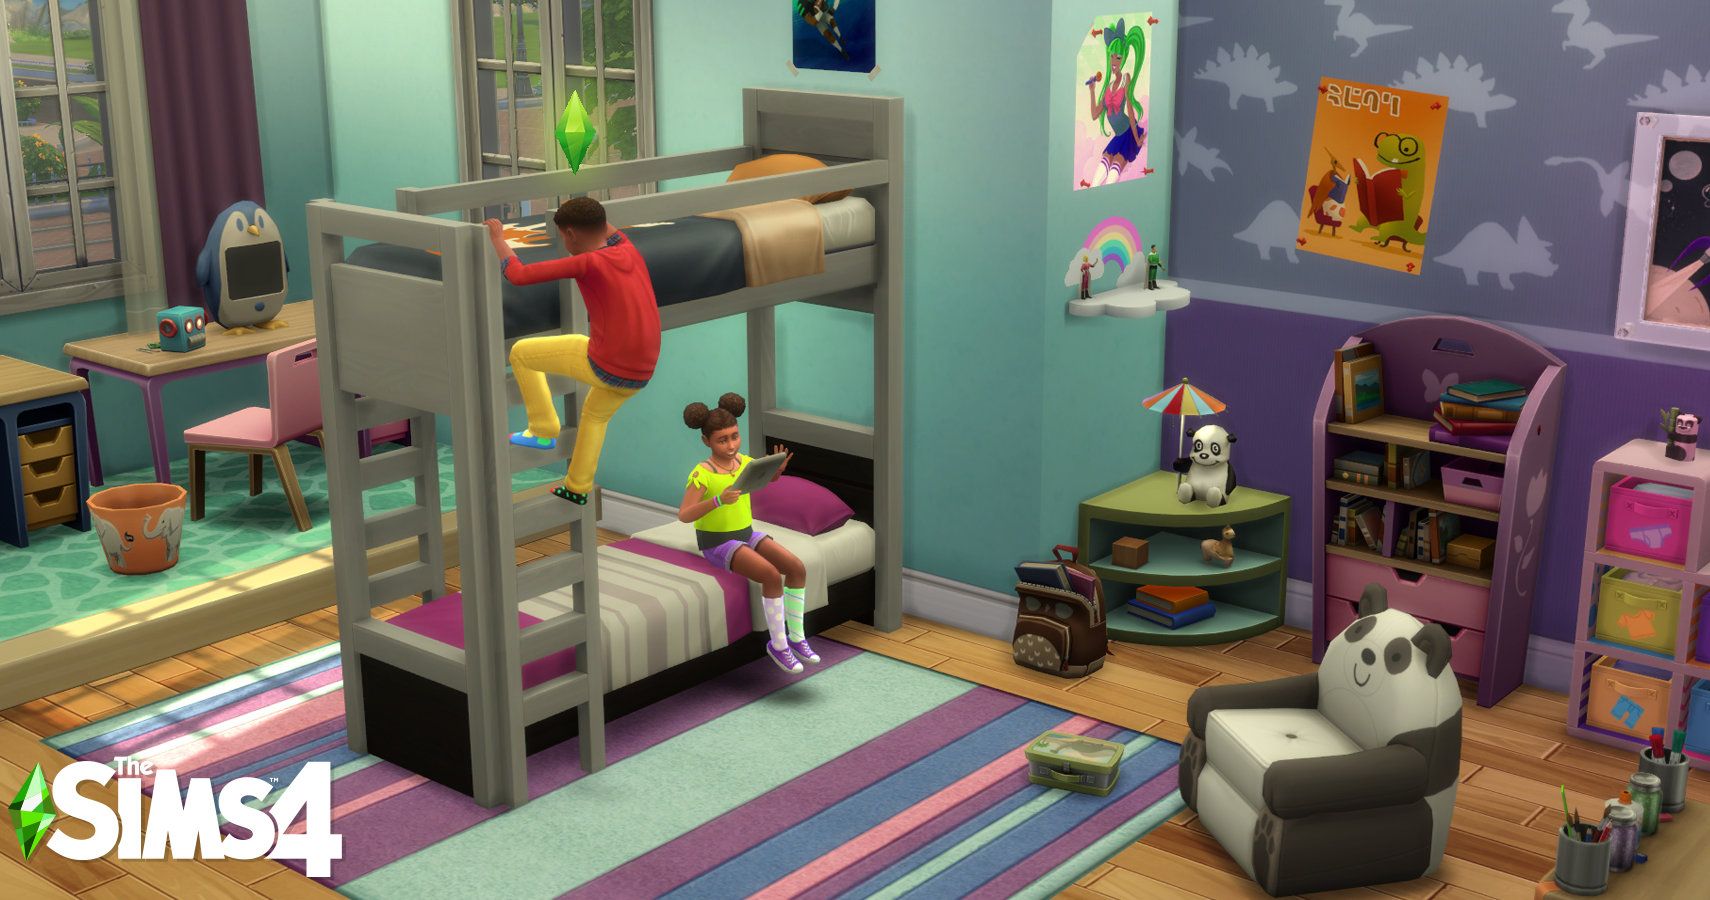 Sims 4 Free Update Adds Diverse Artwork Trait Enhancements And Bunk Beds